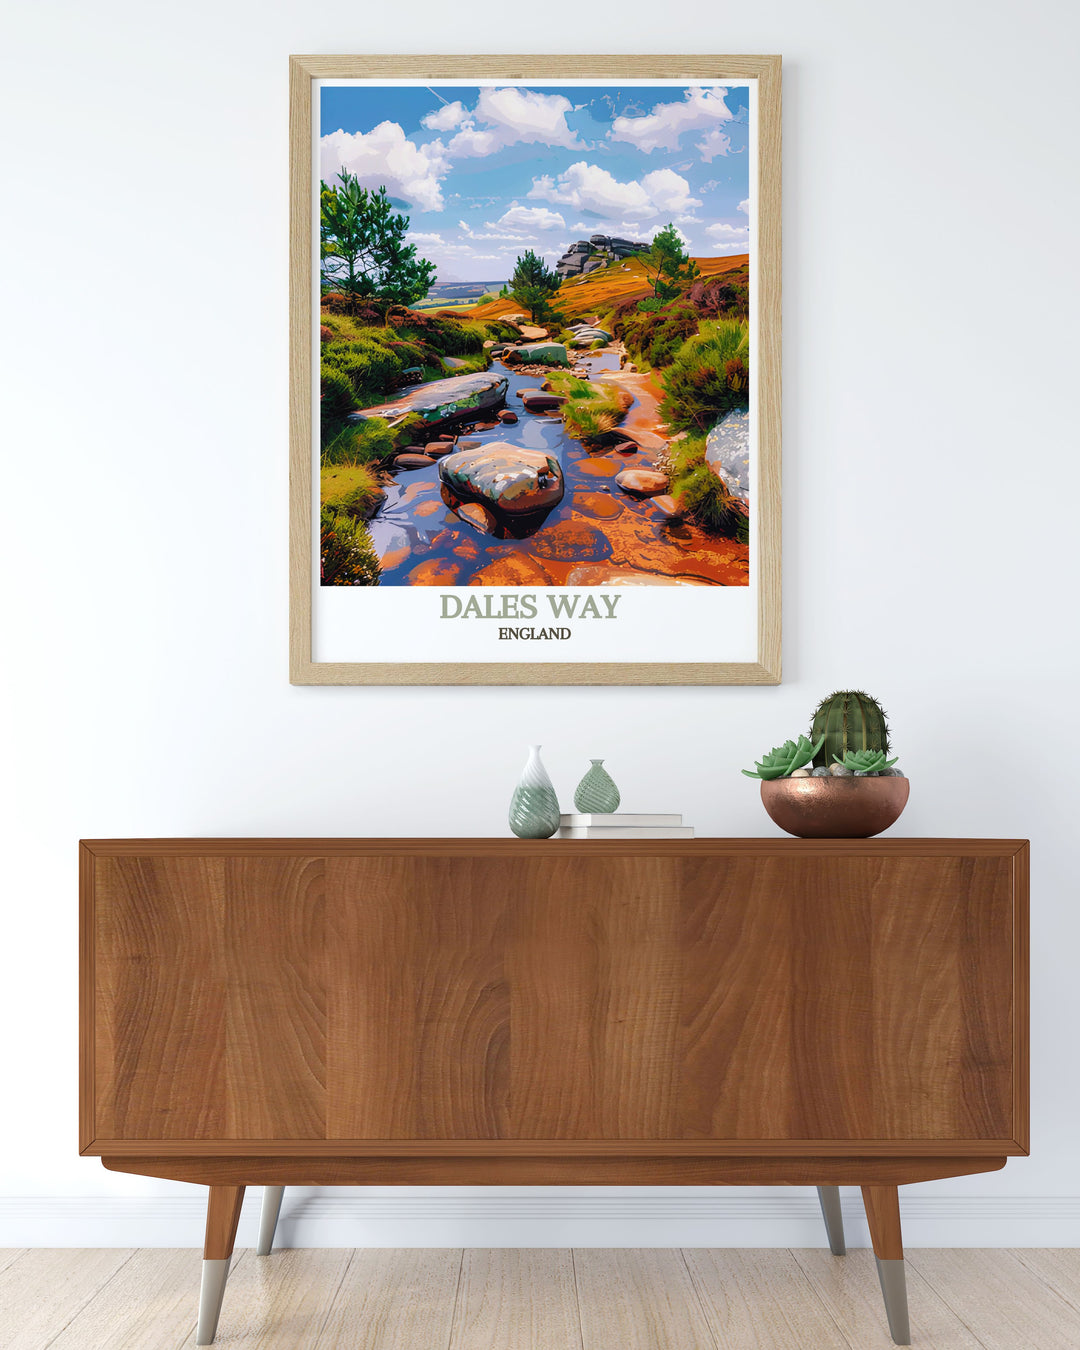 Home decor print illustrating the iconic scenes of Ilkley Moor, highlighting the rich history and breathtaking views of Yorkshires countryside.